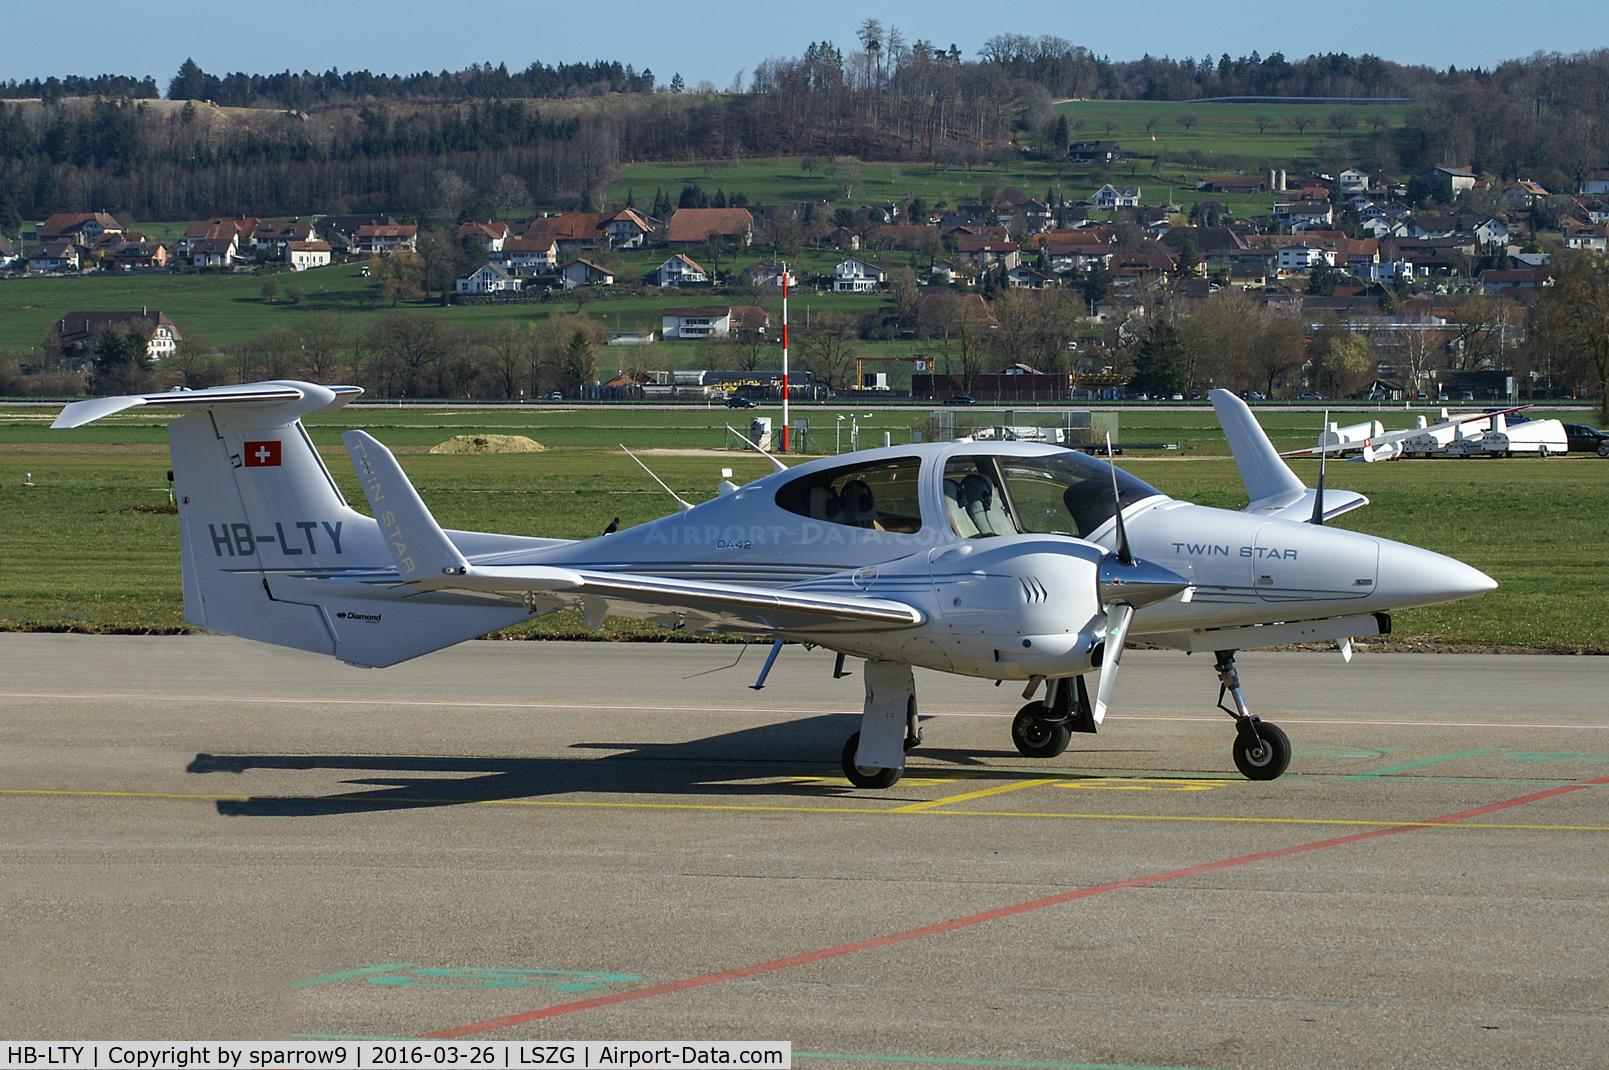 HB-LTY, 2005 Diamond DA-42 Twin Star C/N 42.069, HB-registered from 2006-03-01 until 2010-06-22 and from  2013-07-17 until 2019-02-25.